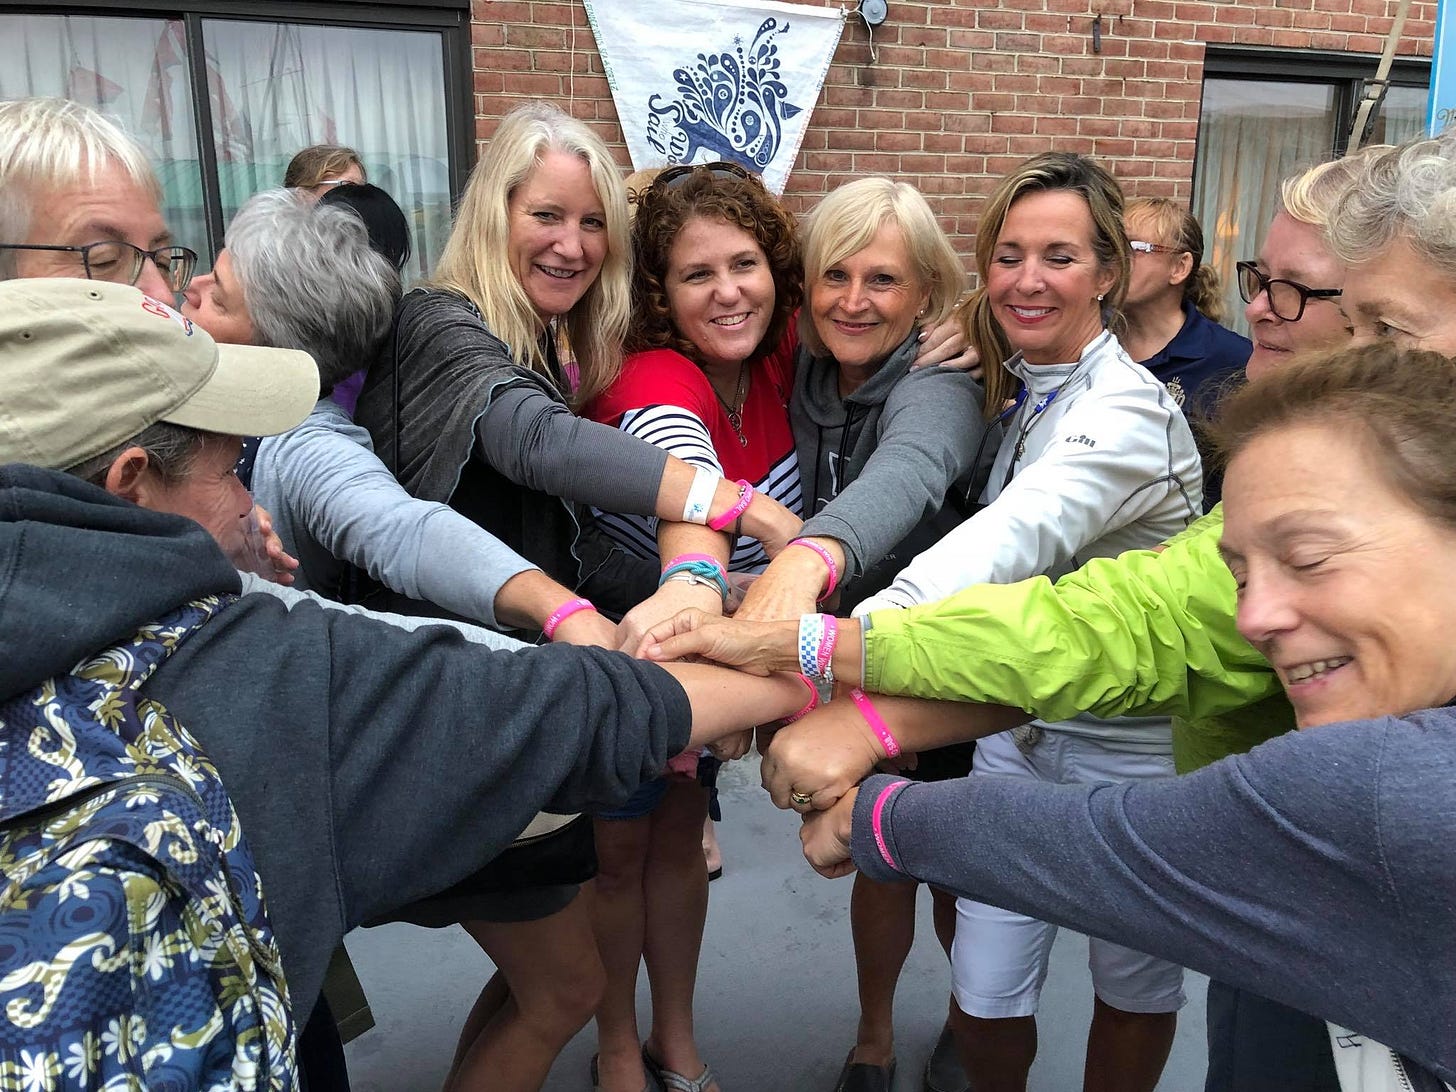 Meetup of women at Pussers in Annapolis showing off their WWS wristbands